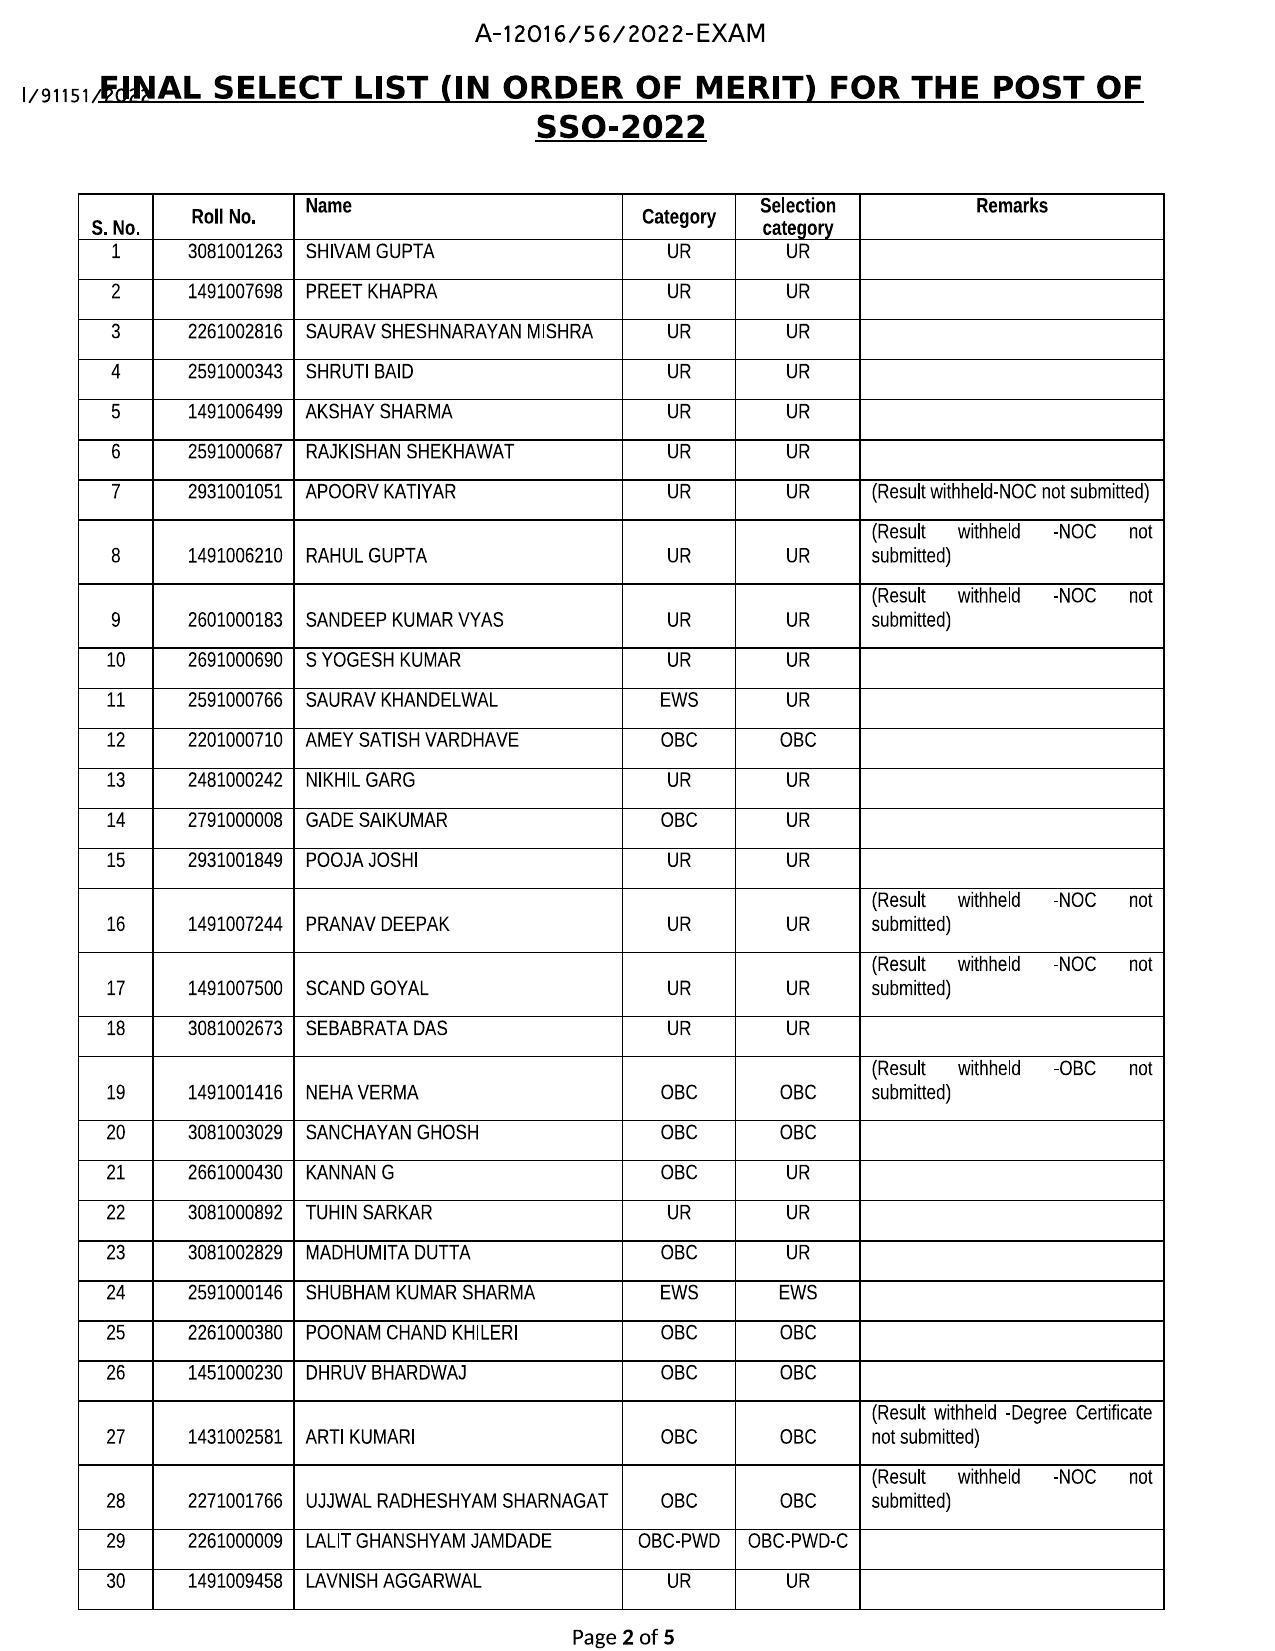 ESIC Social Security Officer 2022 - SSO Final Result Released - Page 1